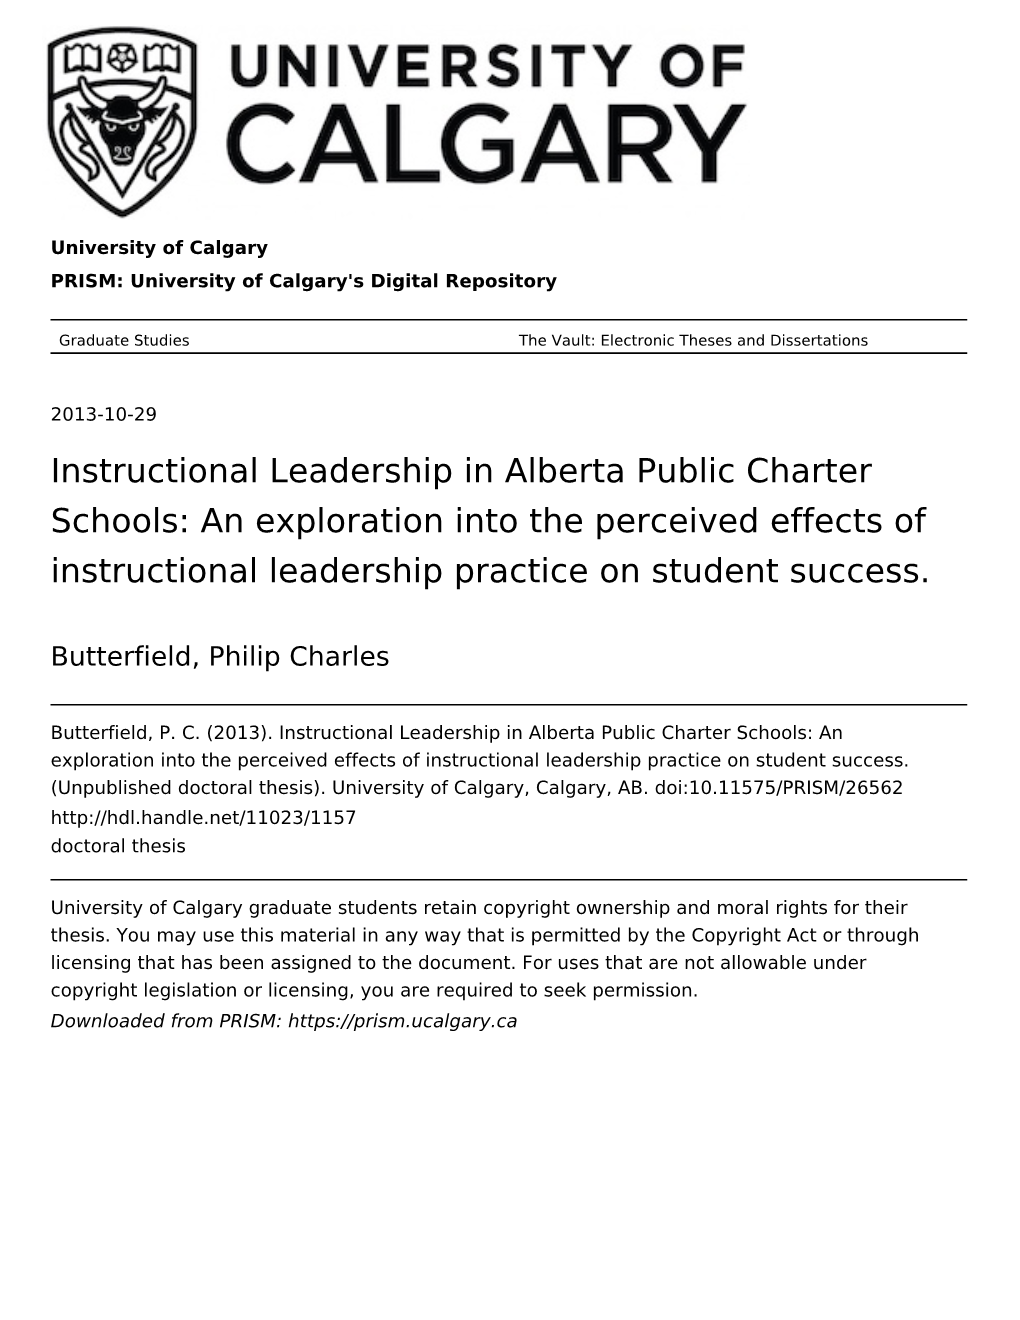 Instructional Leadership in Alberta Public Charter Schools: an Exploration Into the Perceived Effects of Instructional Leadership Practice on Student Success